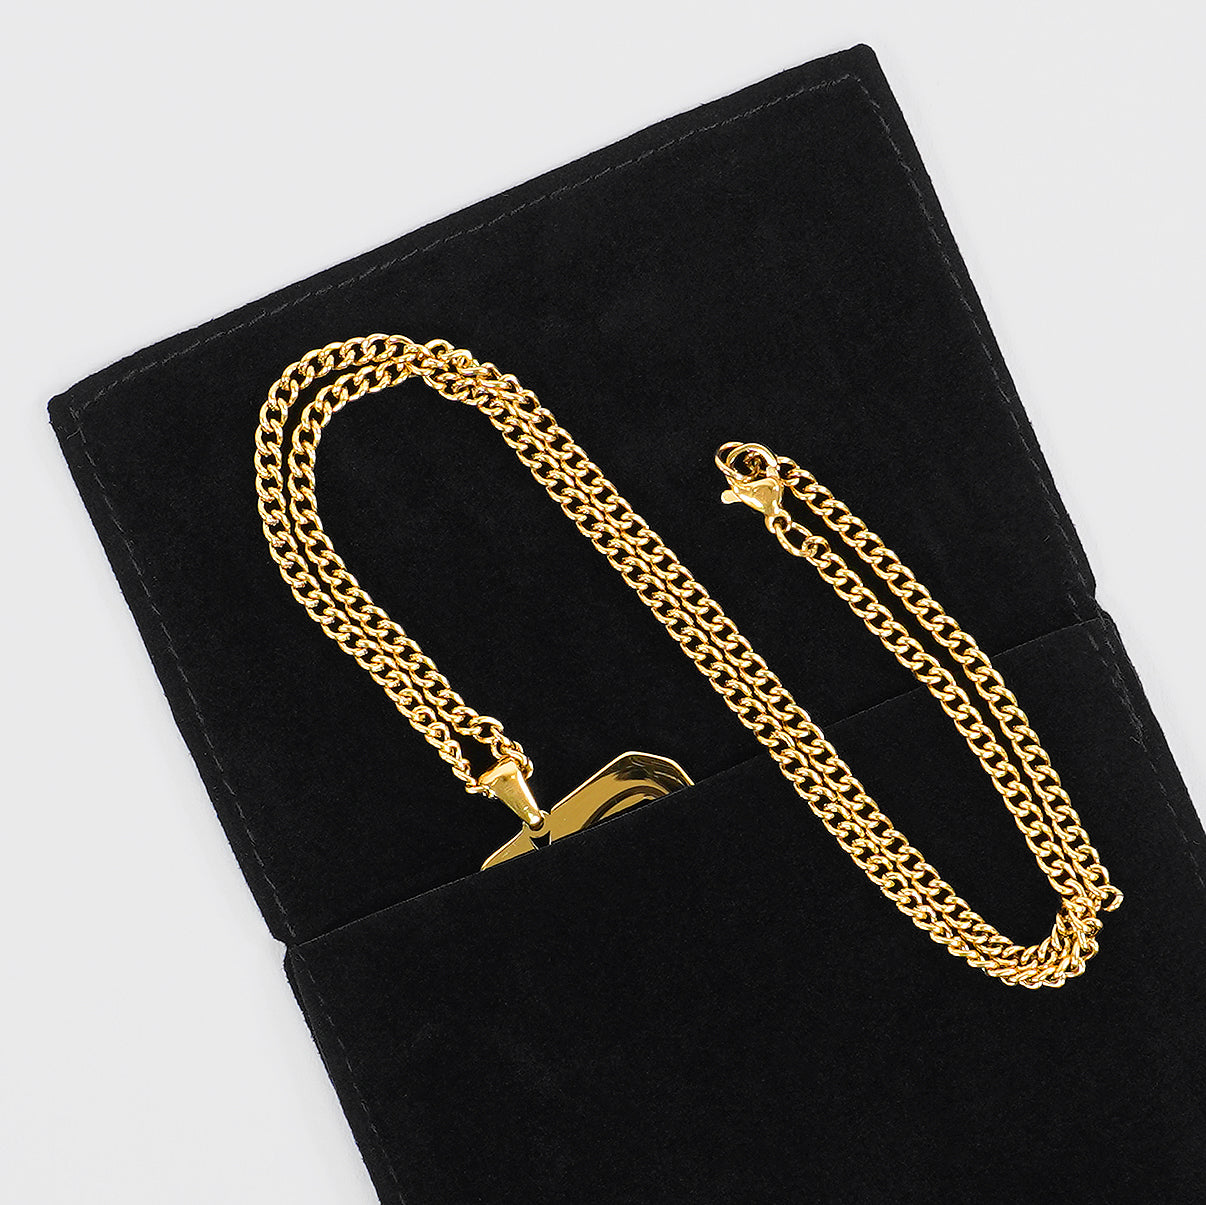 37 Number Pendant with Chain Necklace - Gold Plated Stainless Steel